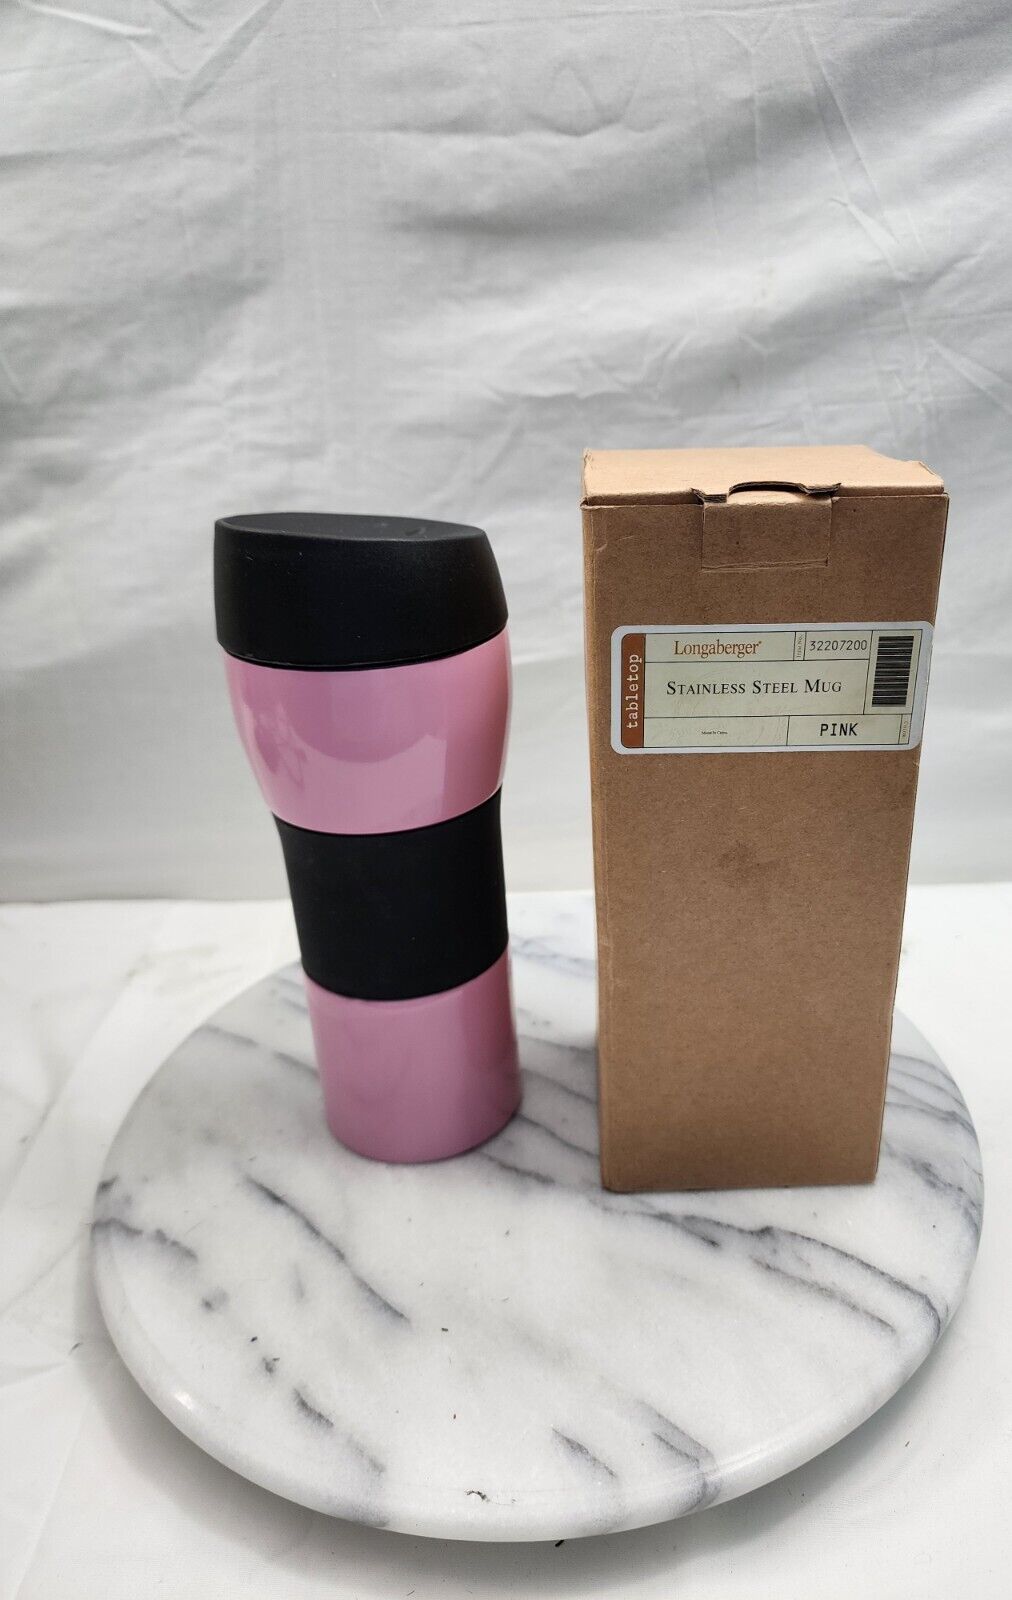 LONGABERGER STAINLESS STEEL MUG WITH LID - PINK - BRAND NEW IN BOX - RETIRED